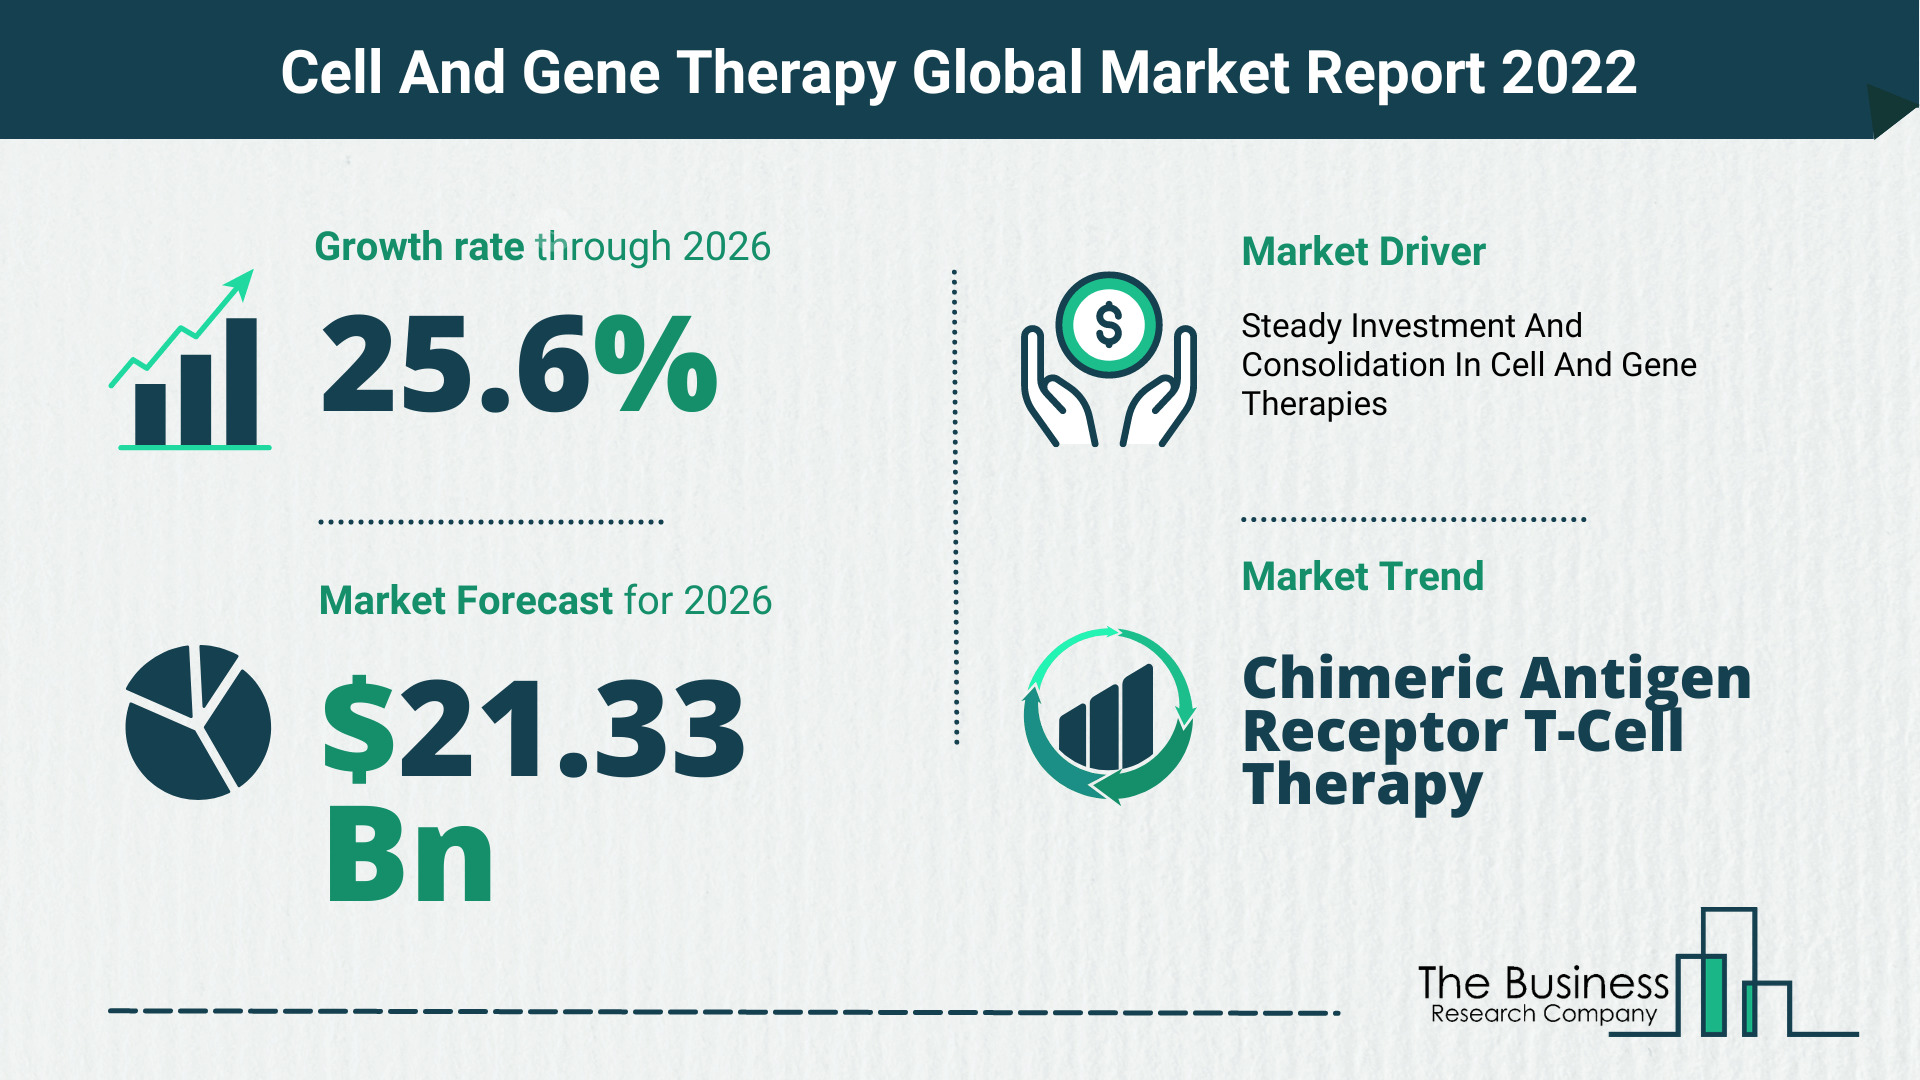 Global Cell And Gene Therapy Market